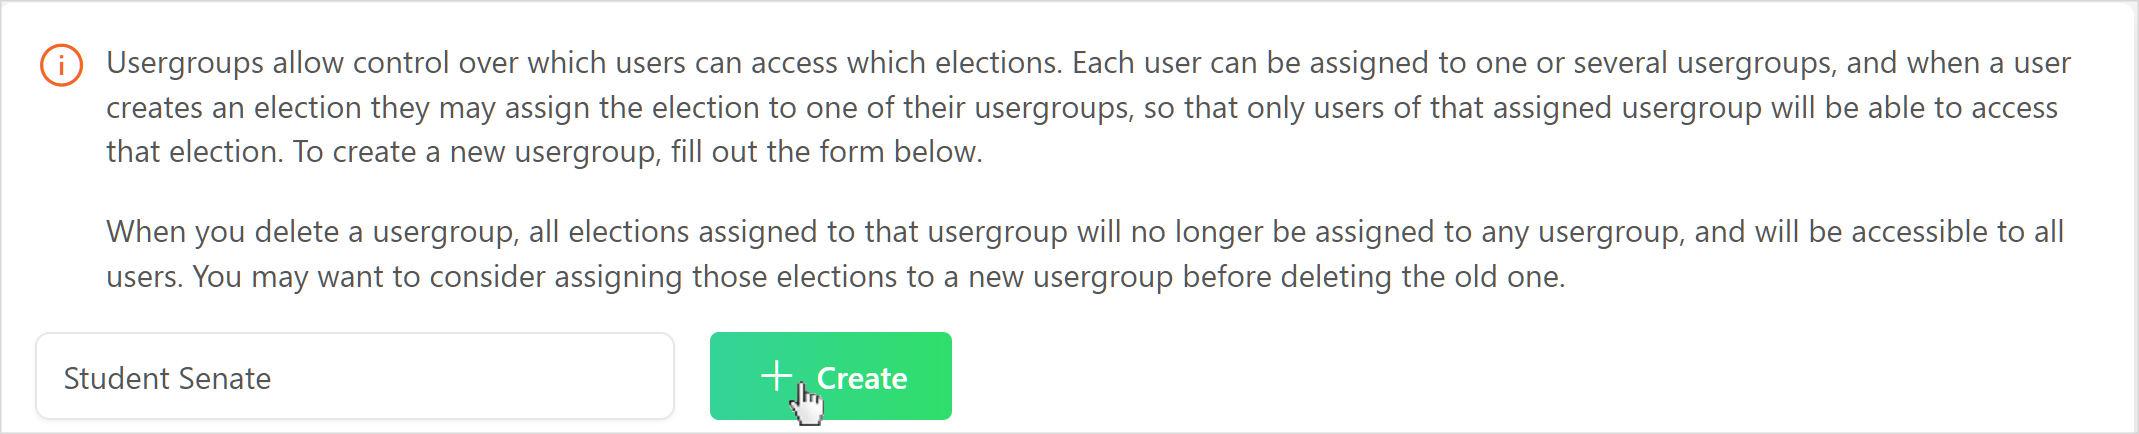 EM_redesign_account_management_create_usergroup_fixed